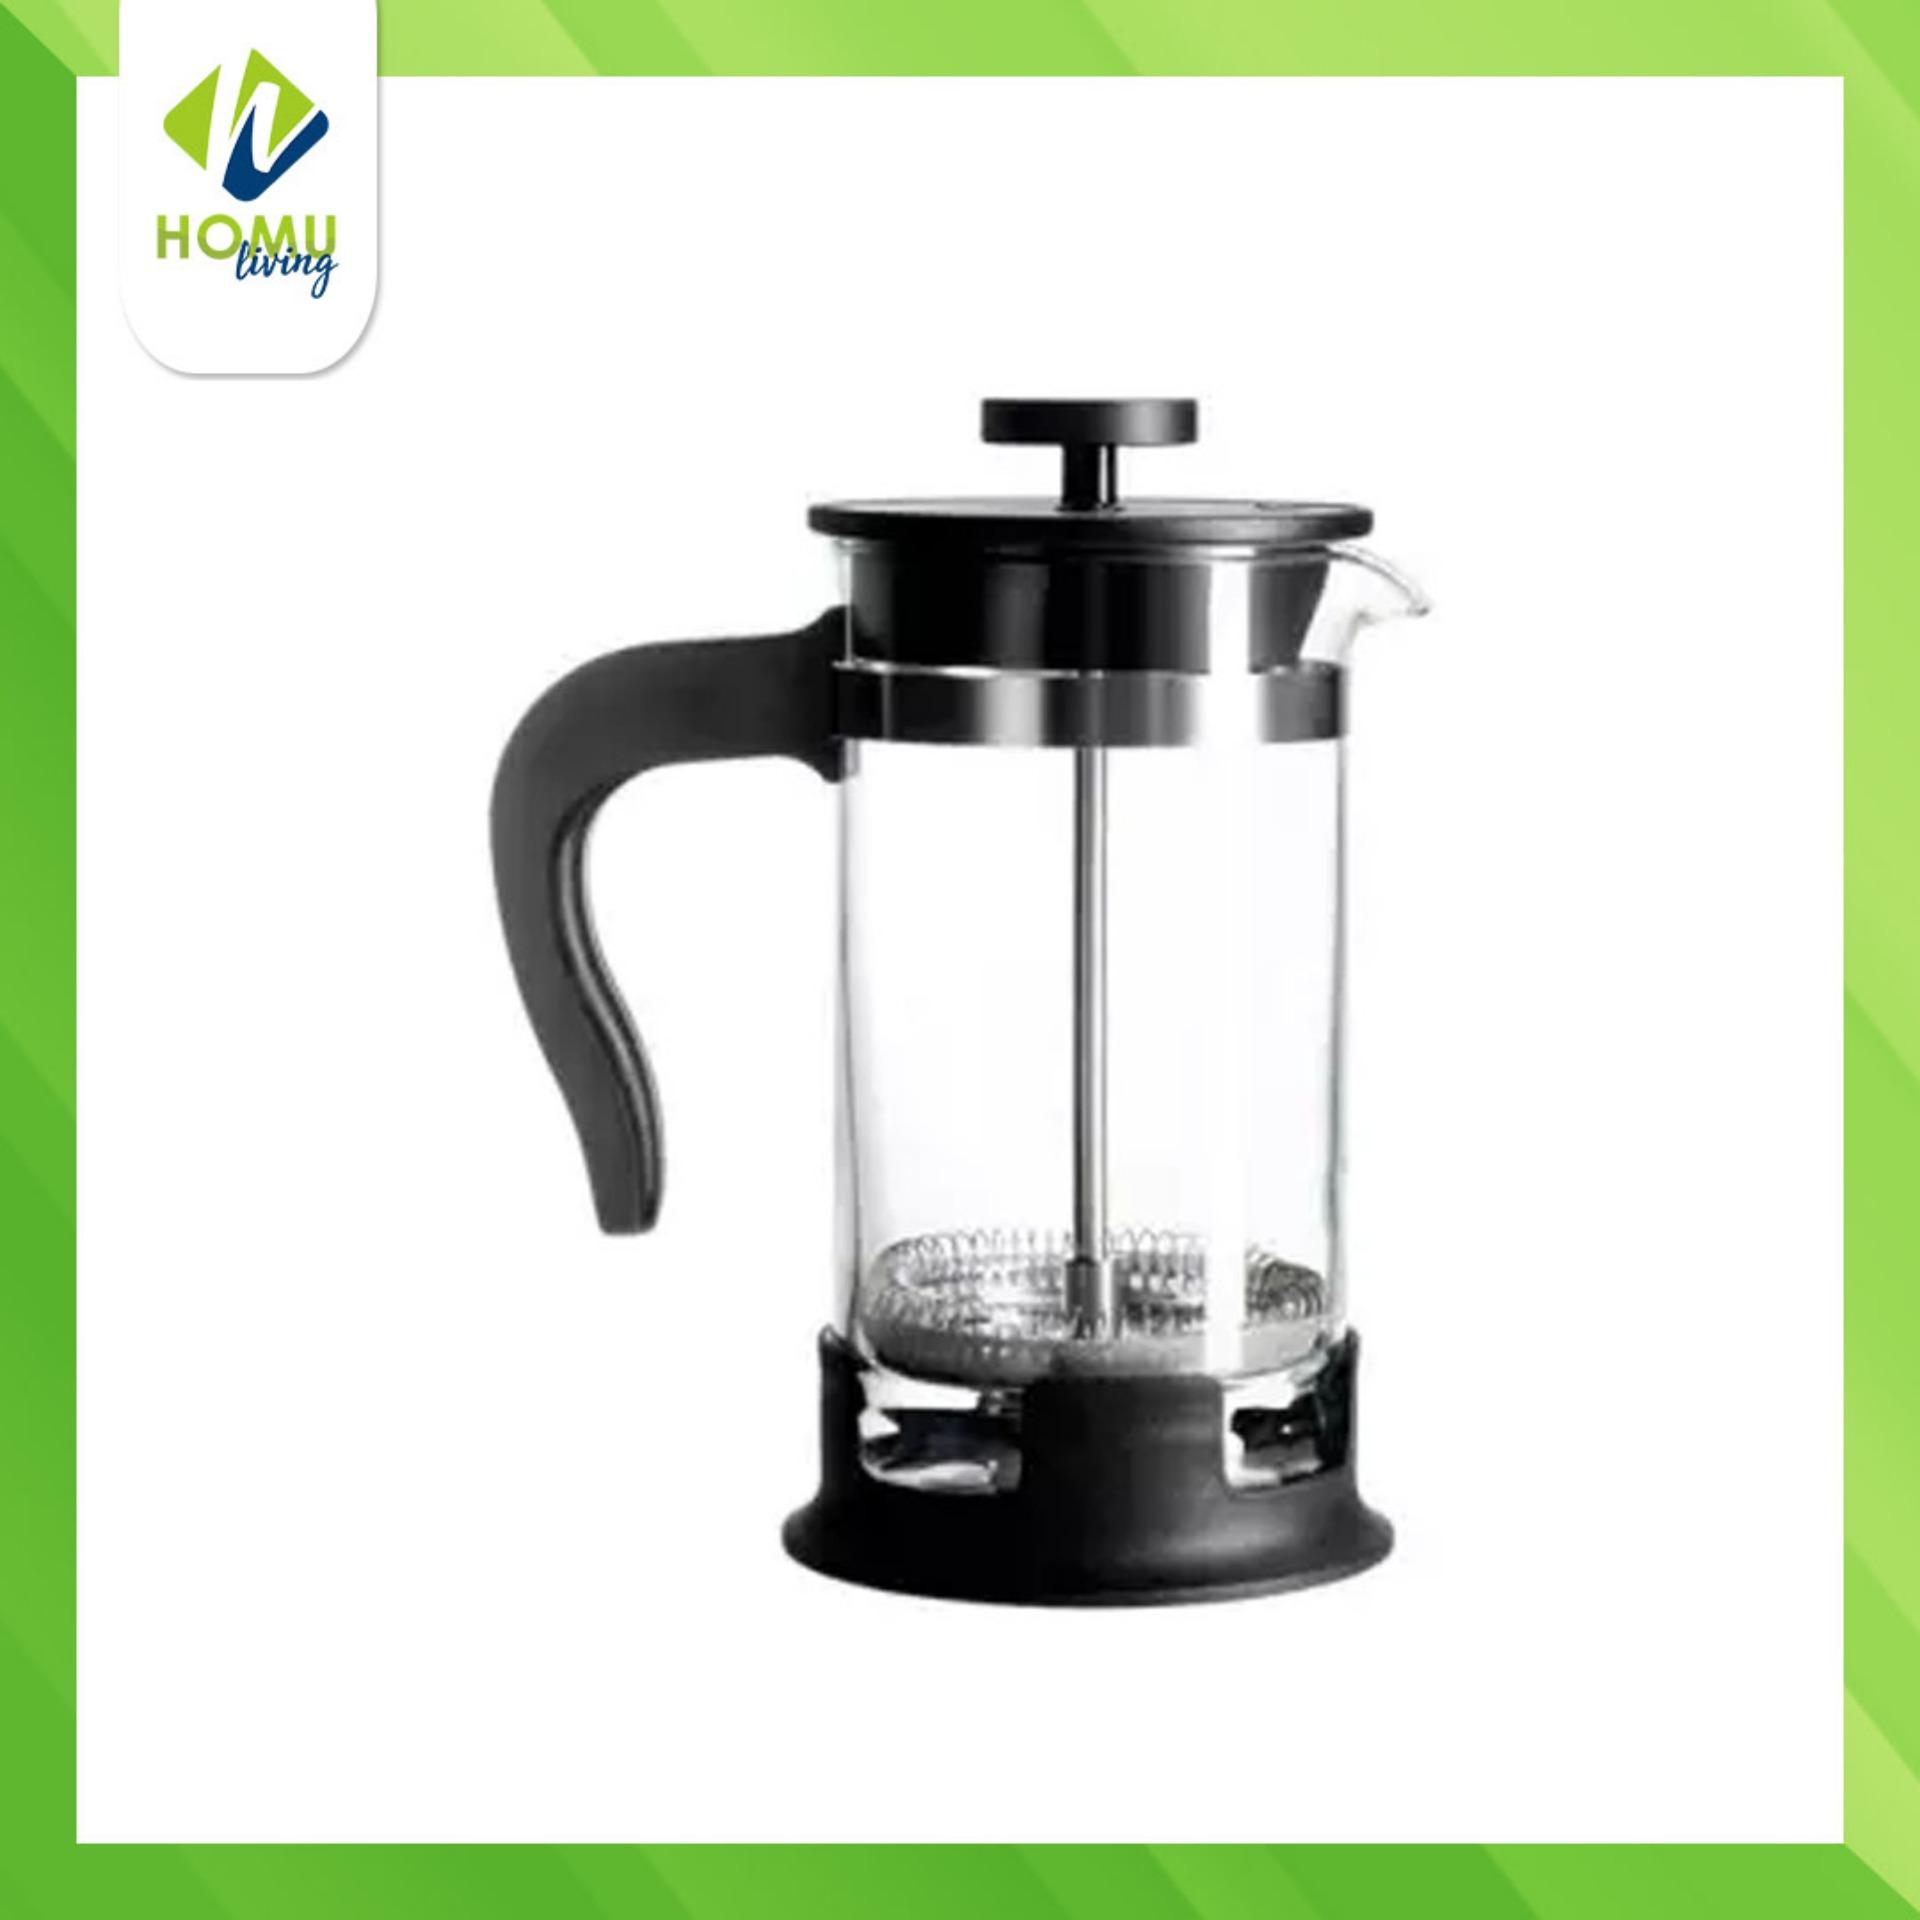 glass UPPHETTA Coffee//tea maker stainless steel Size 1 l Can be taken apart for easy cleaning.